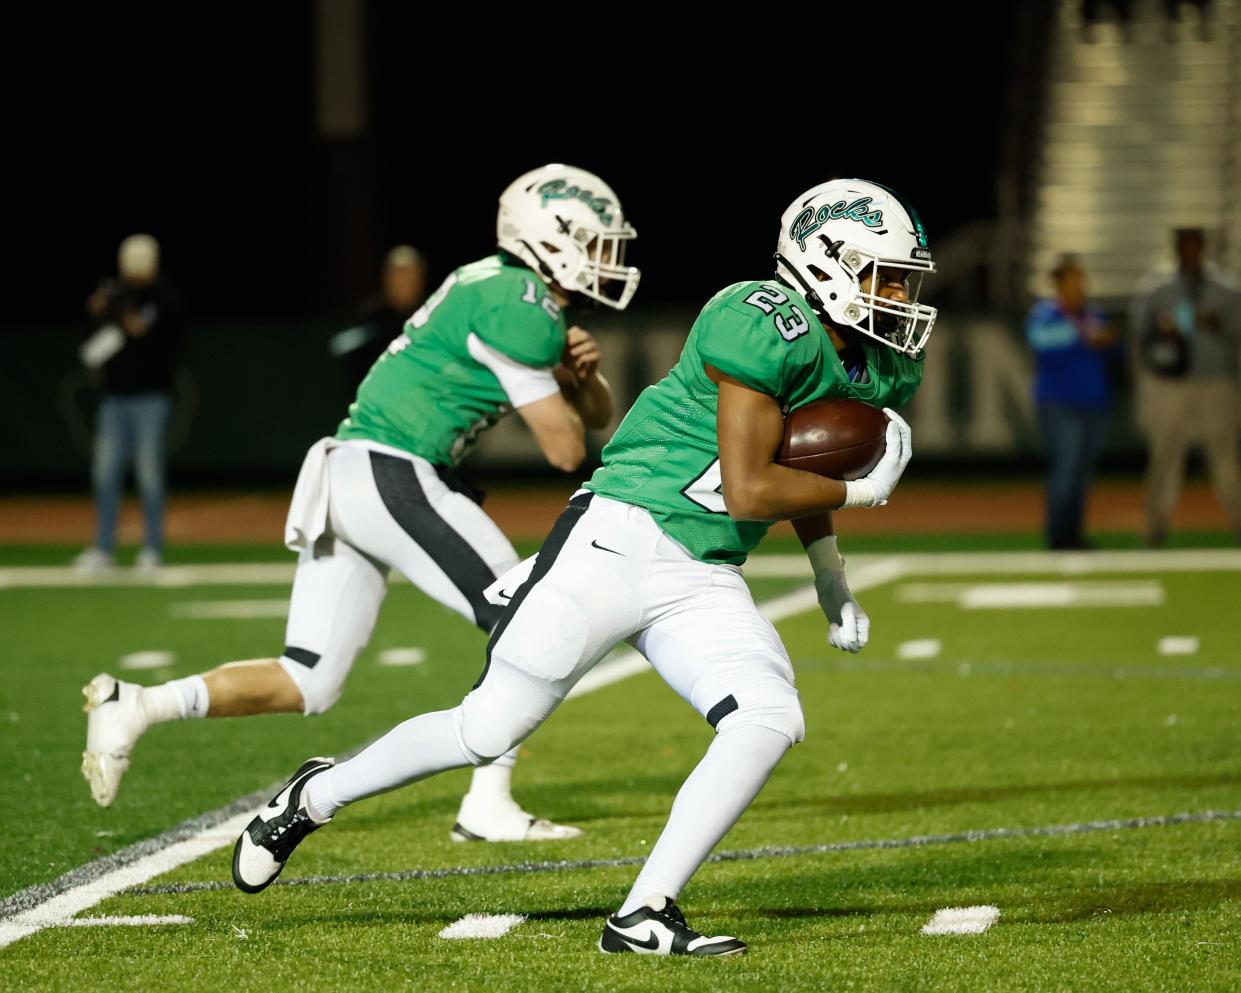 Dublin Coffman’s Daven White carries the ball during Friday's win over Olentangy Liberty.